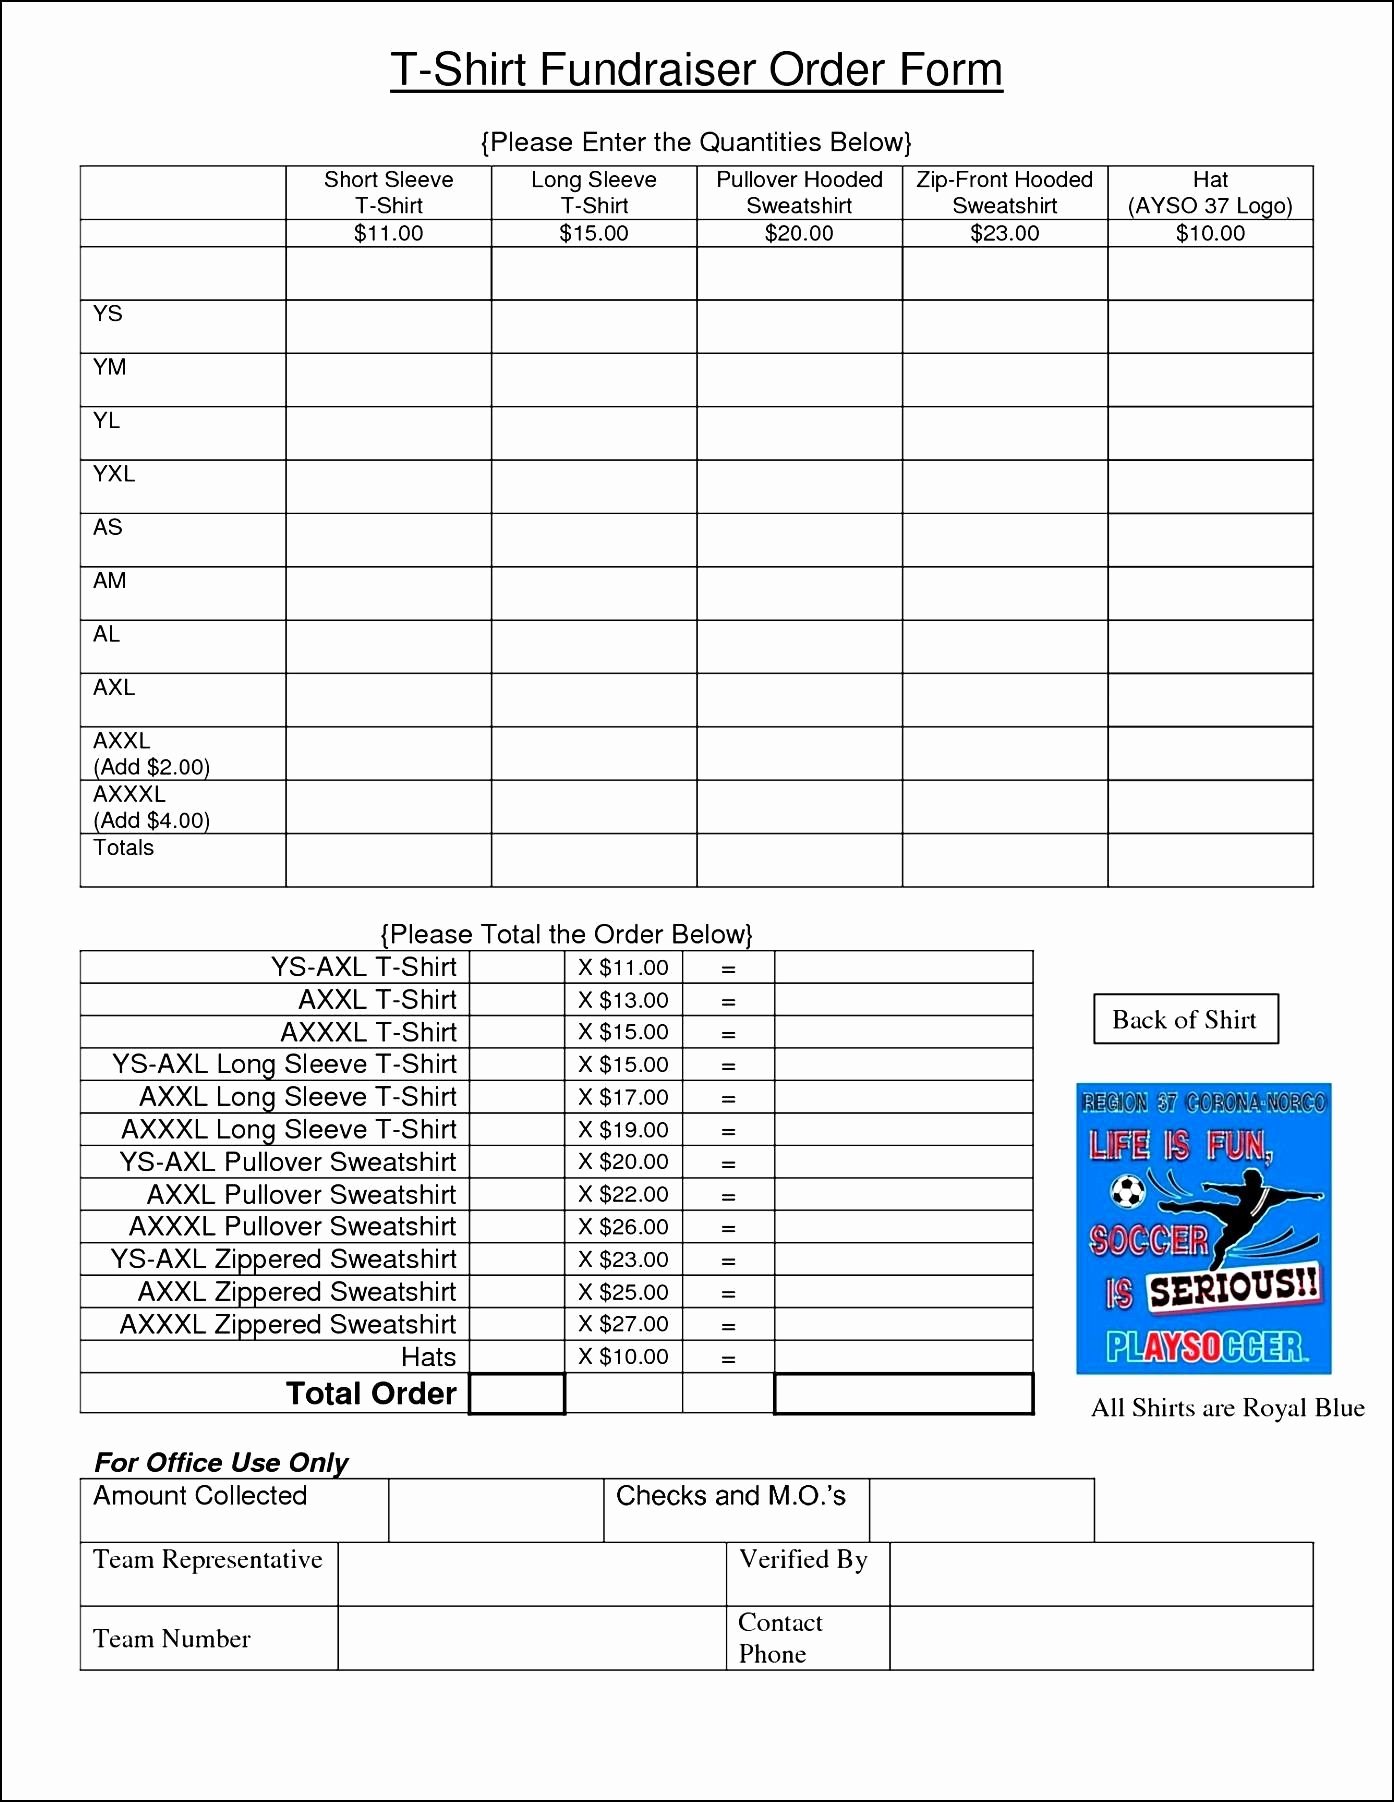 Fundraiser form Template Free Beautiful T Shirt Fundraiser order form Template